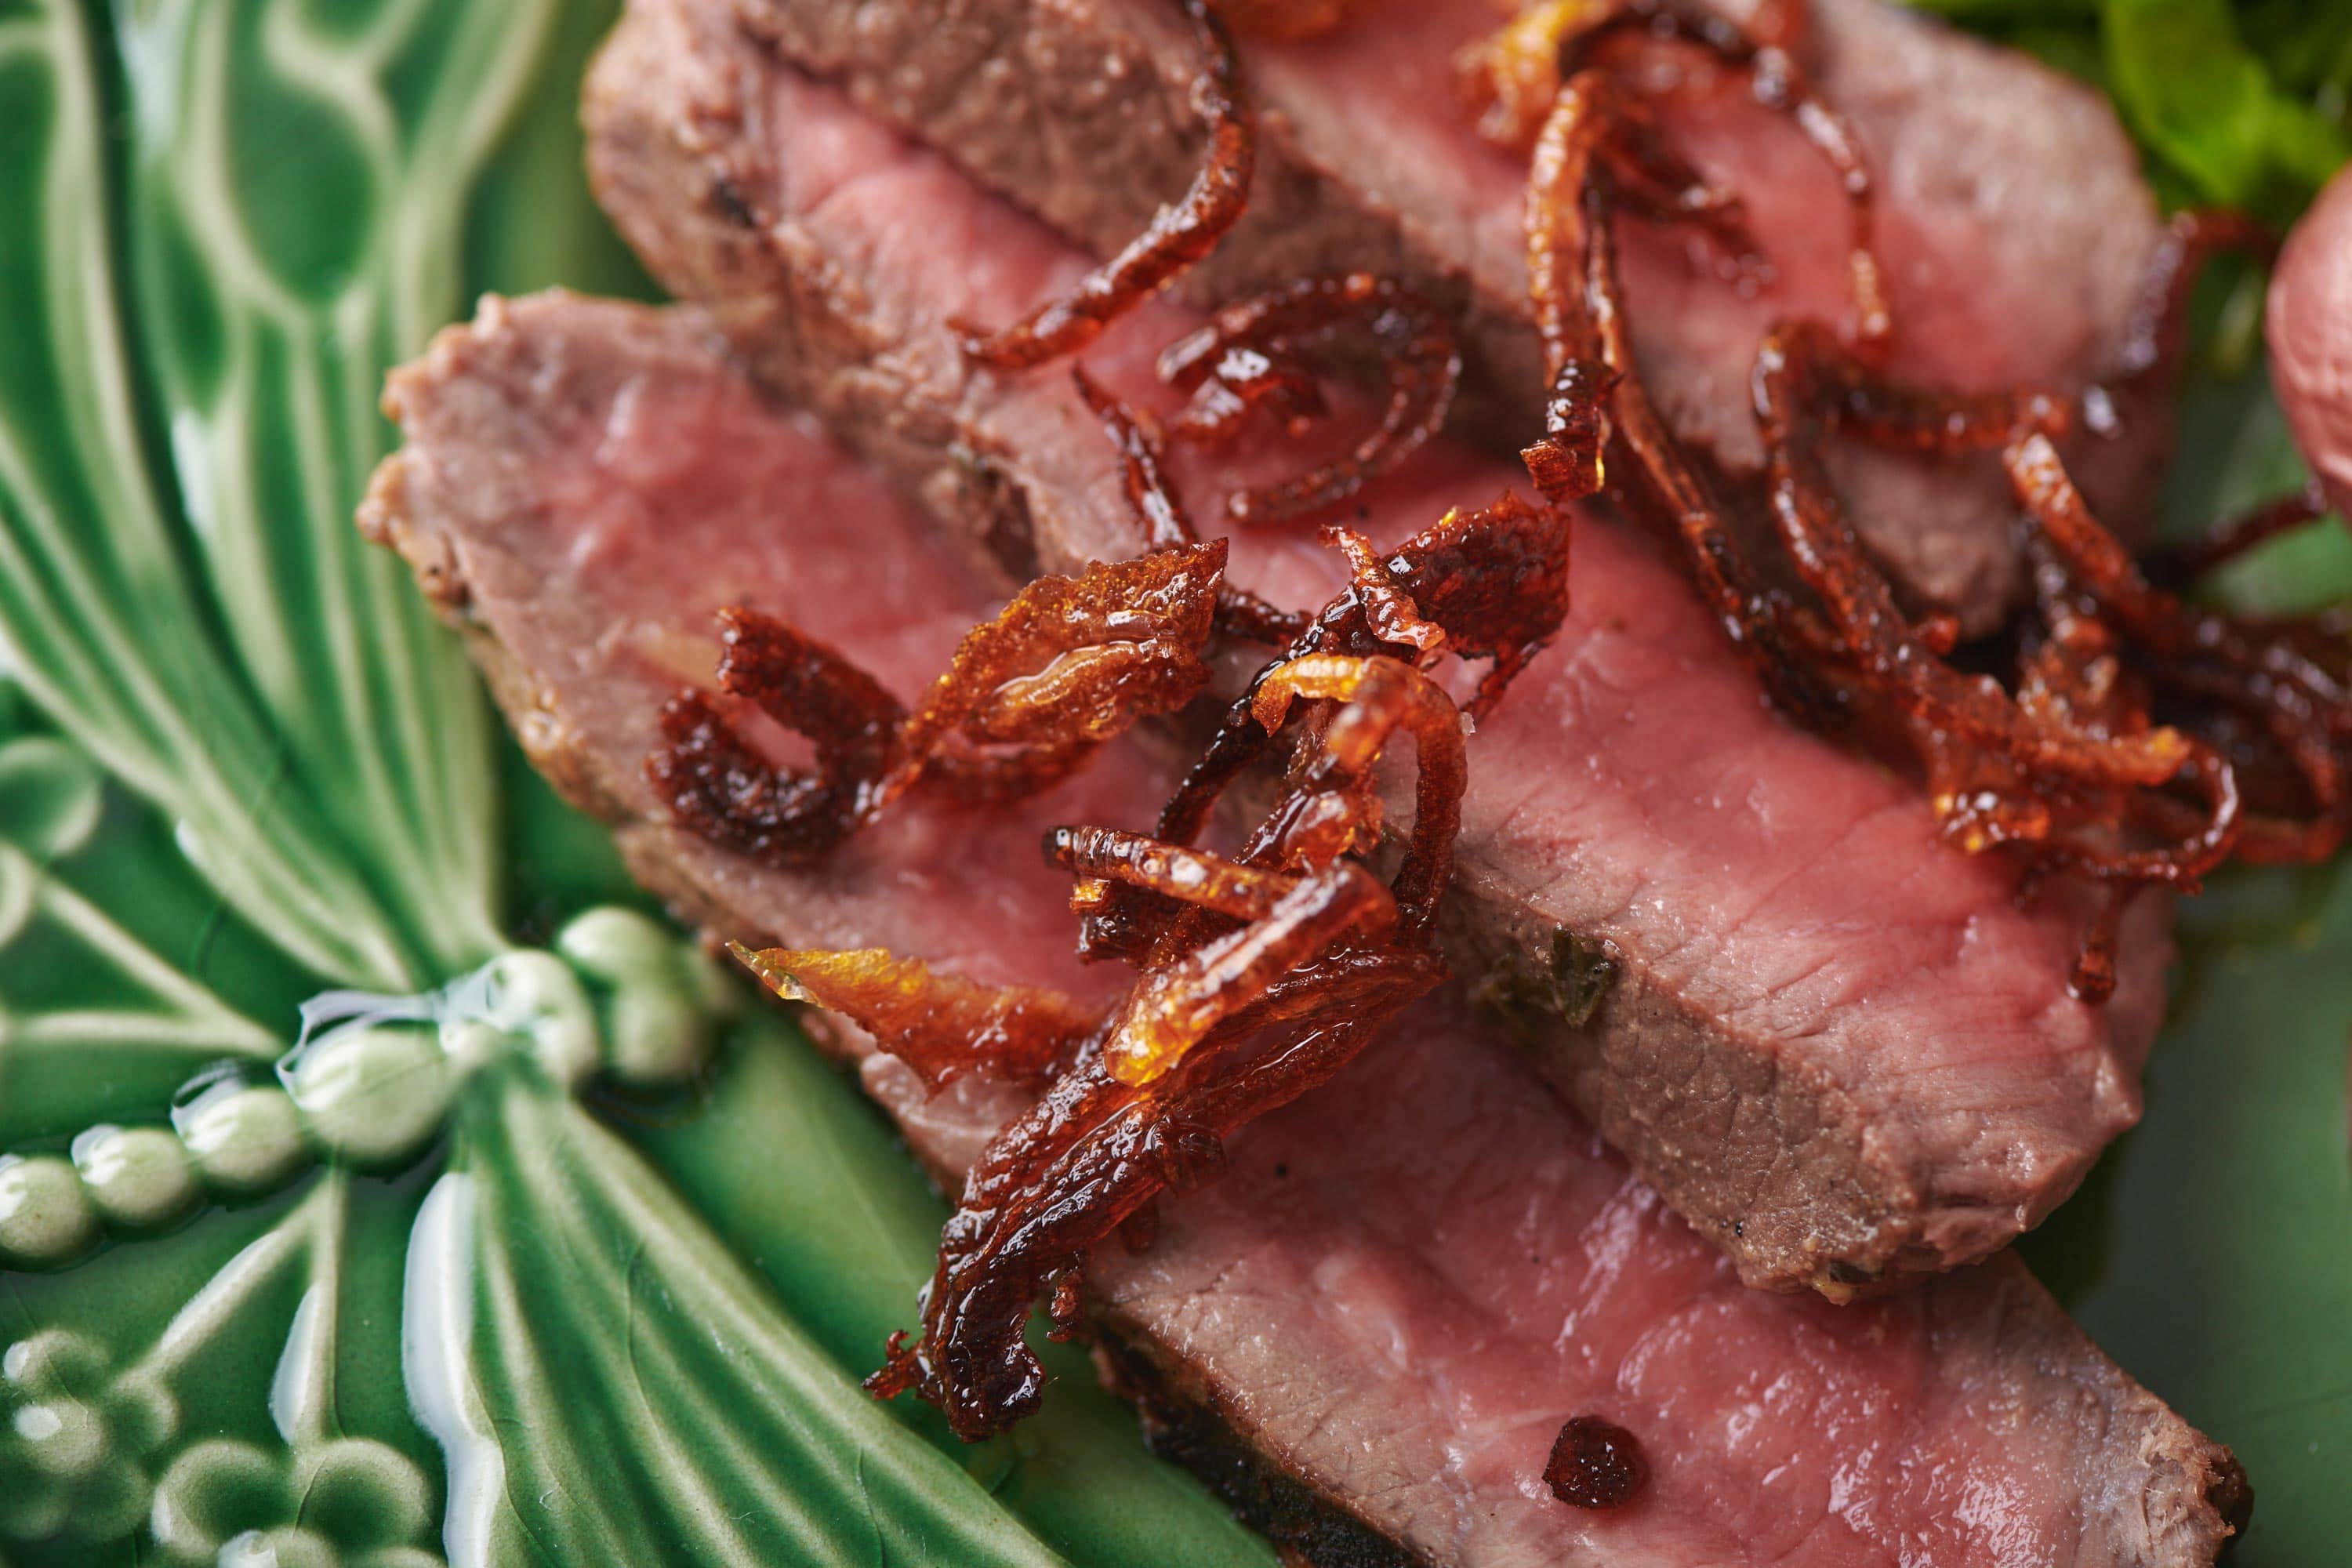 Sliced steak with fried shallots.